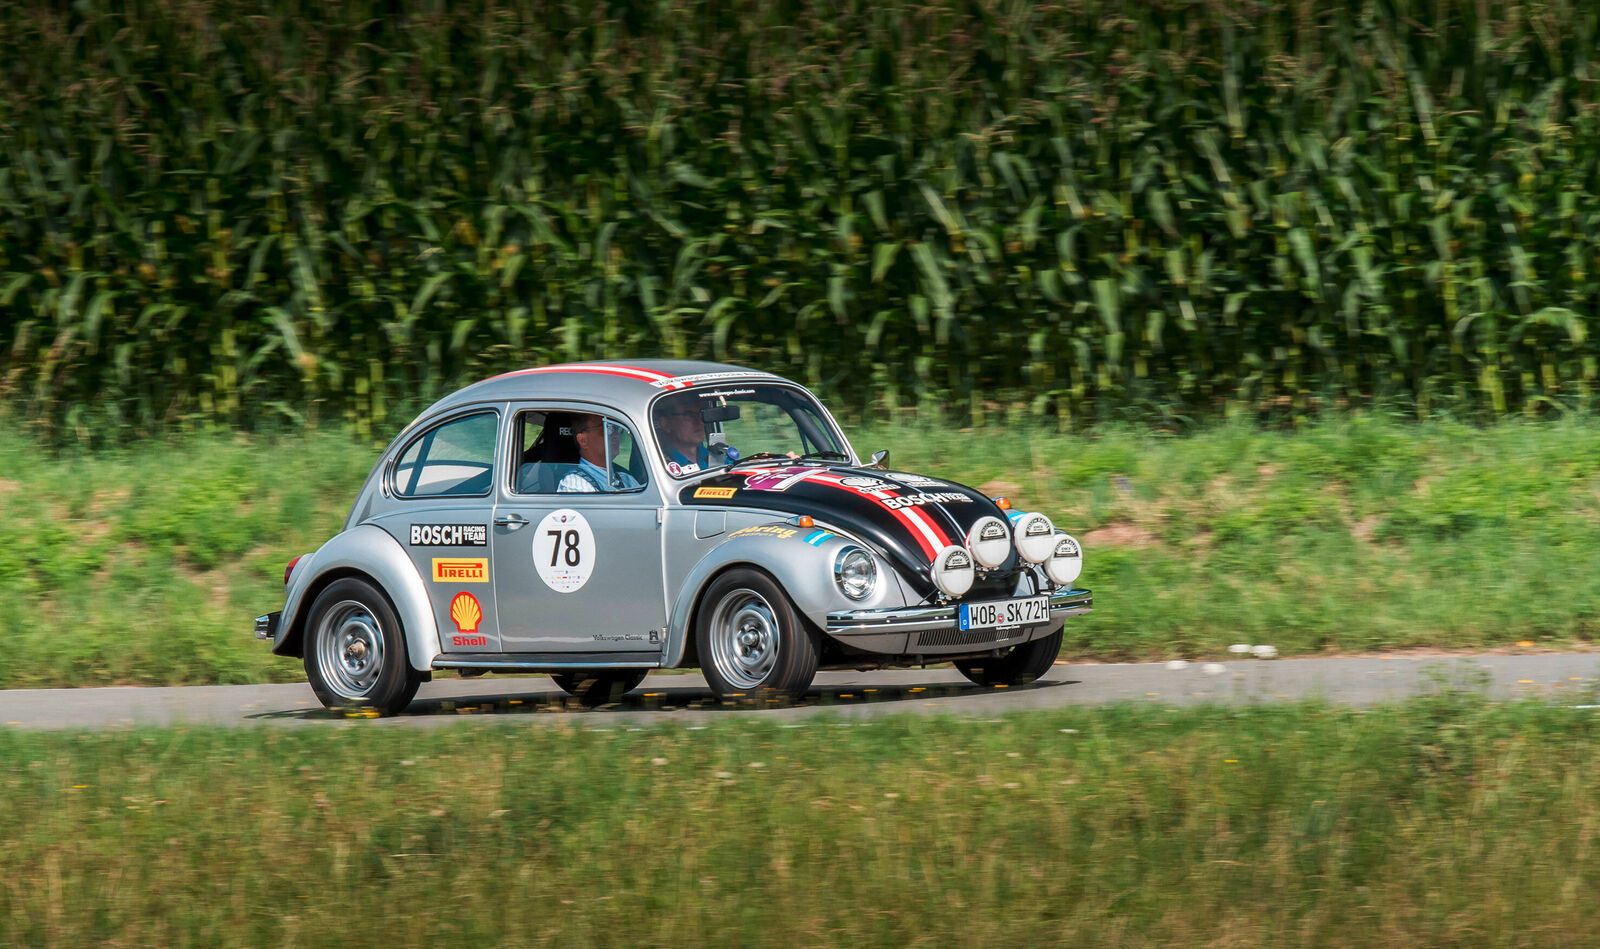 A powerful Beetle for the long-standing rally: Volkswagen 1302 S Rallye ‘Salzburg’ (1971).